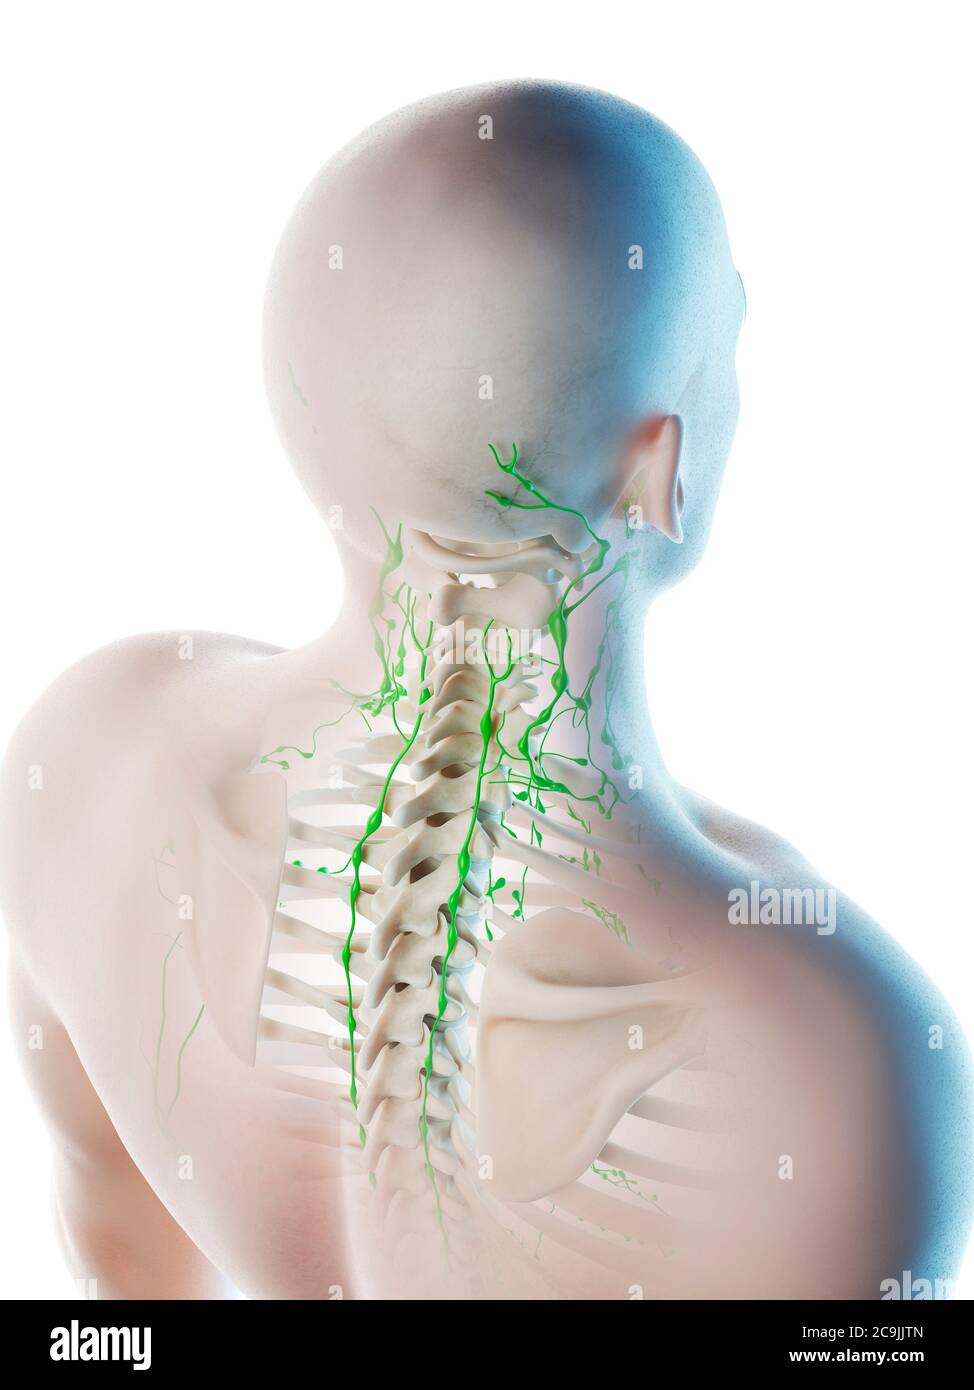 lymph nodes on back of head fixed